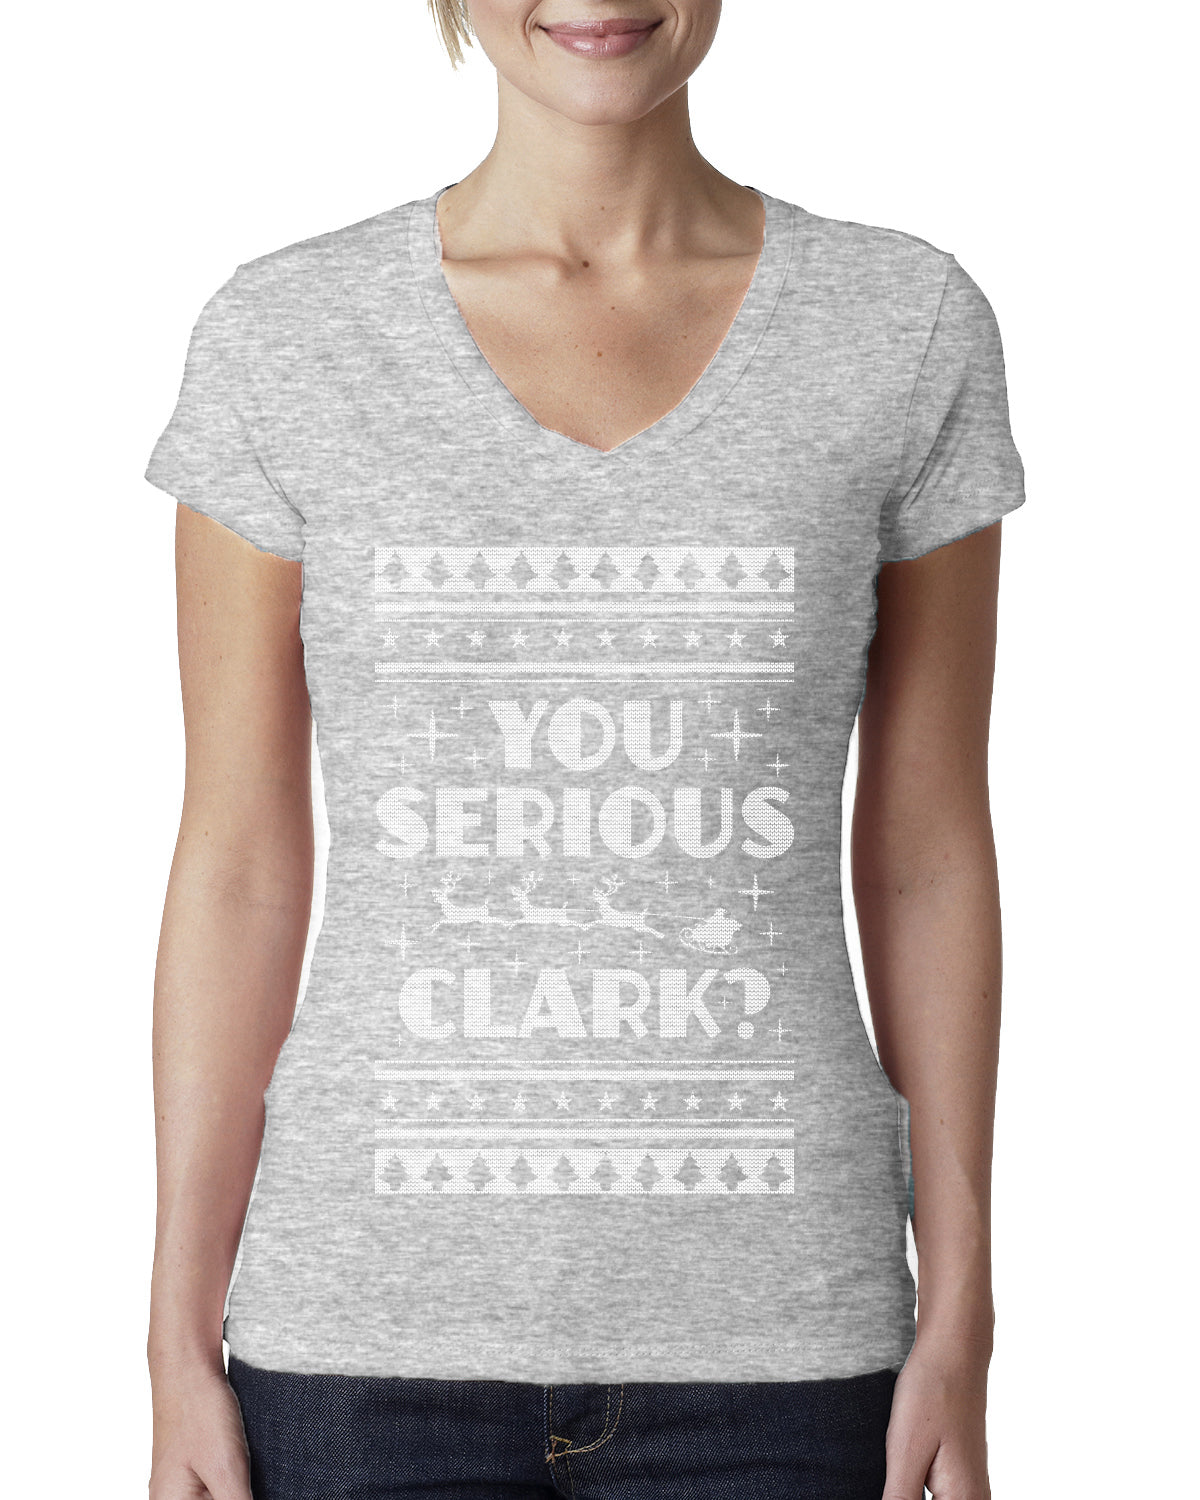 You Serious Clark Christmas Vacation Movie Ugly Christmas Sweater Womens Junior Fit V-Neck Tee